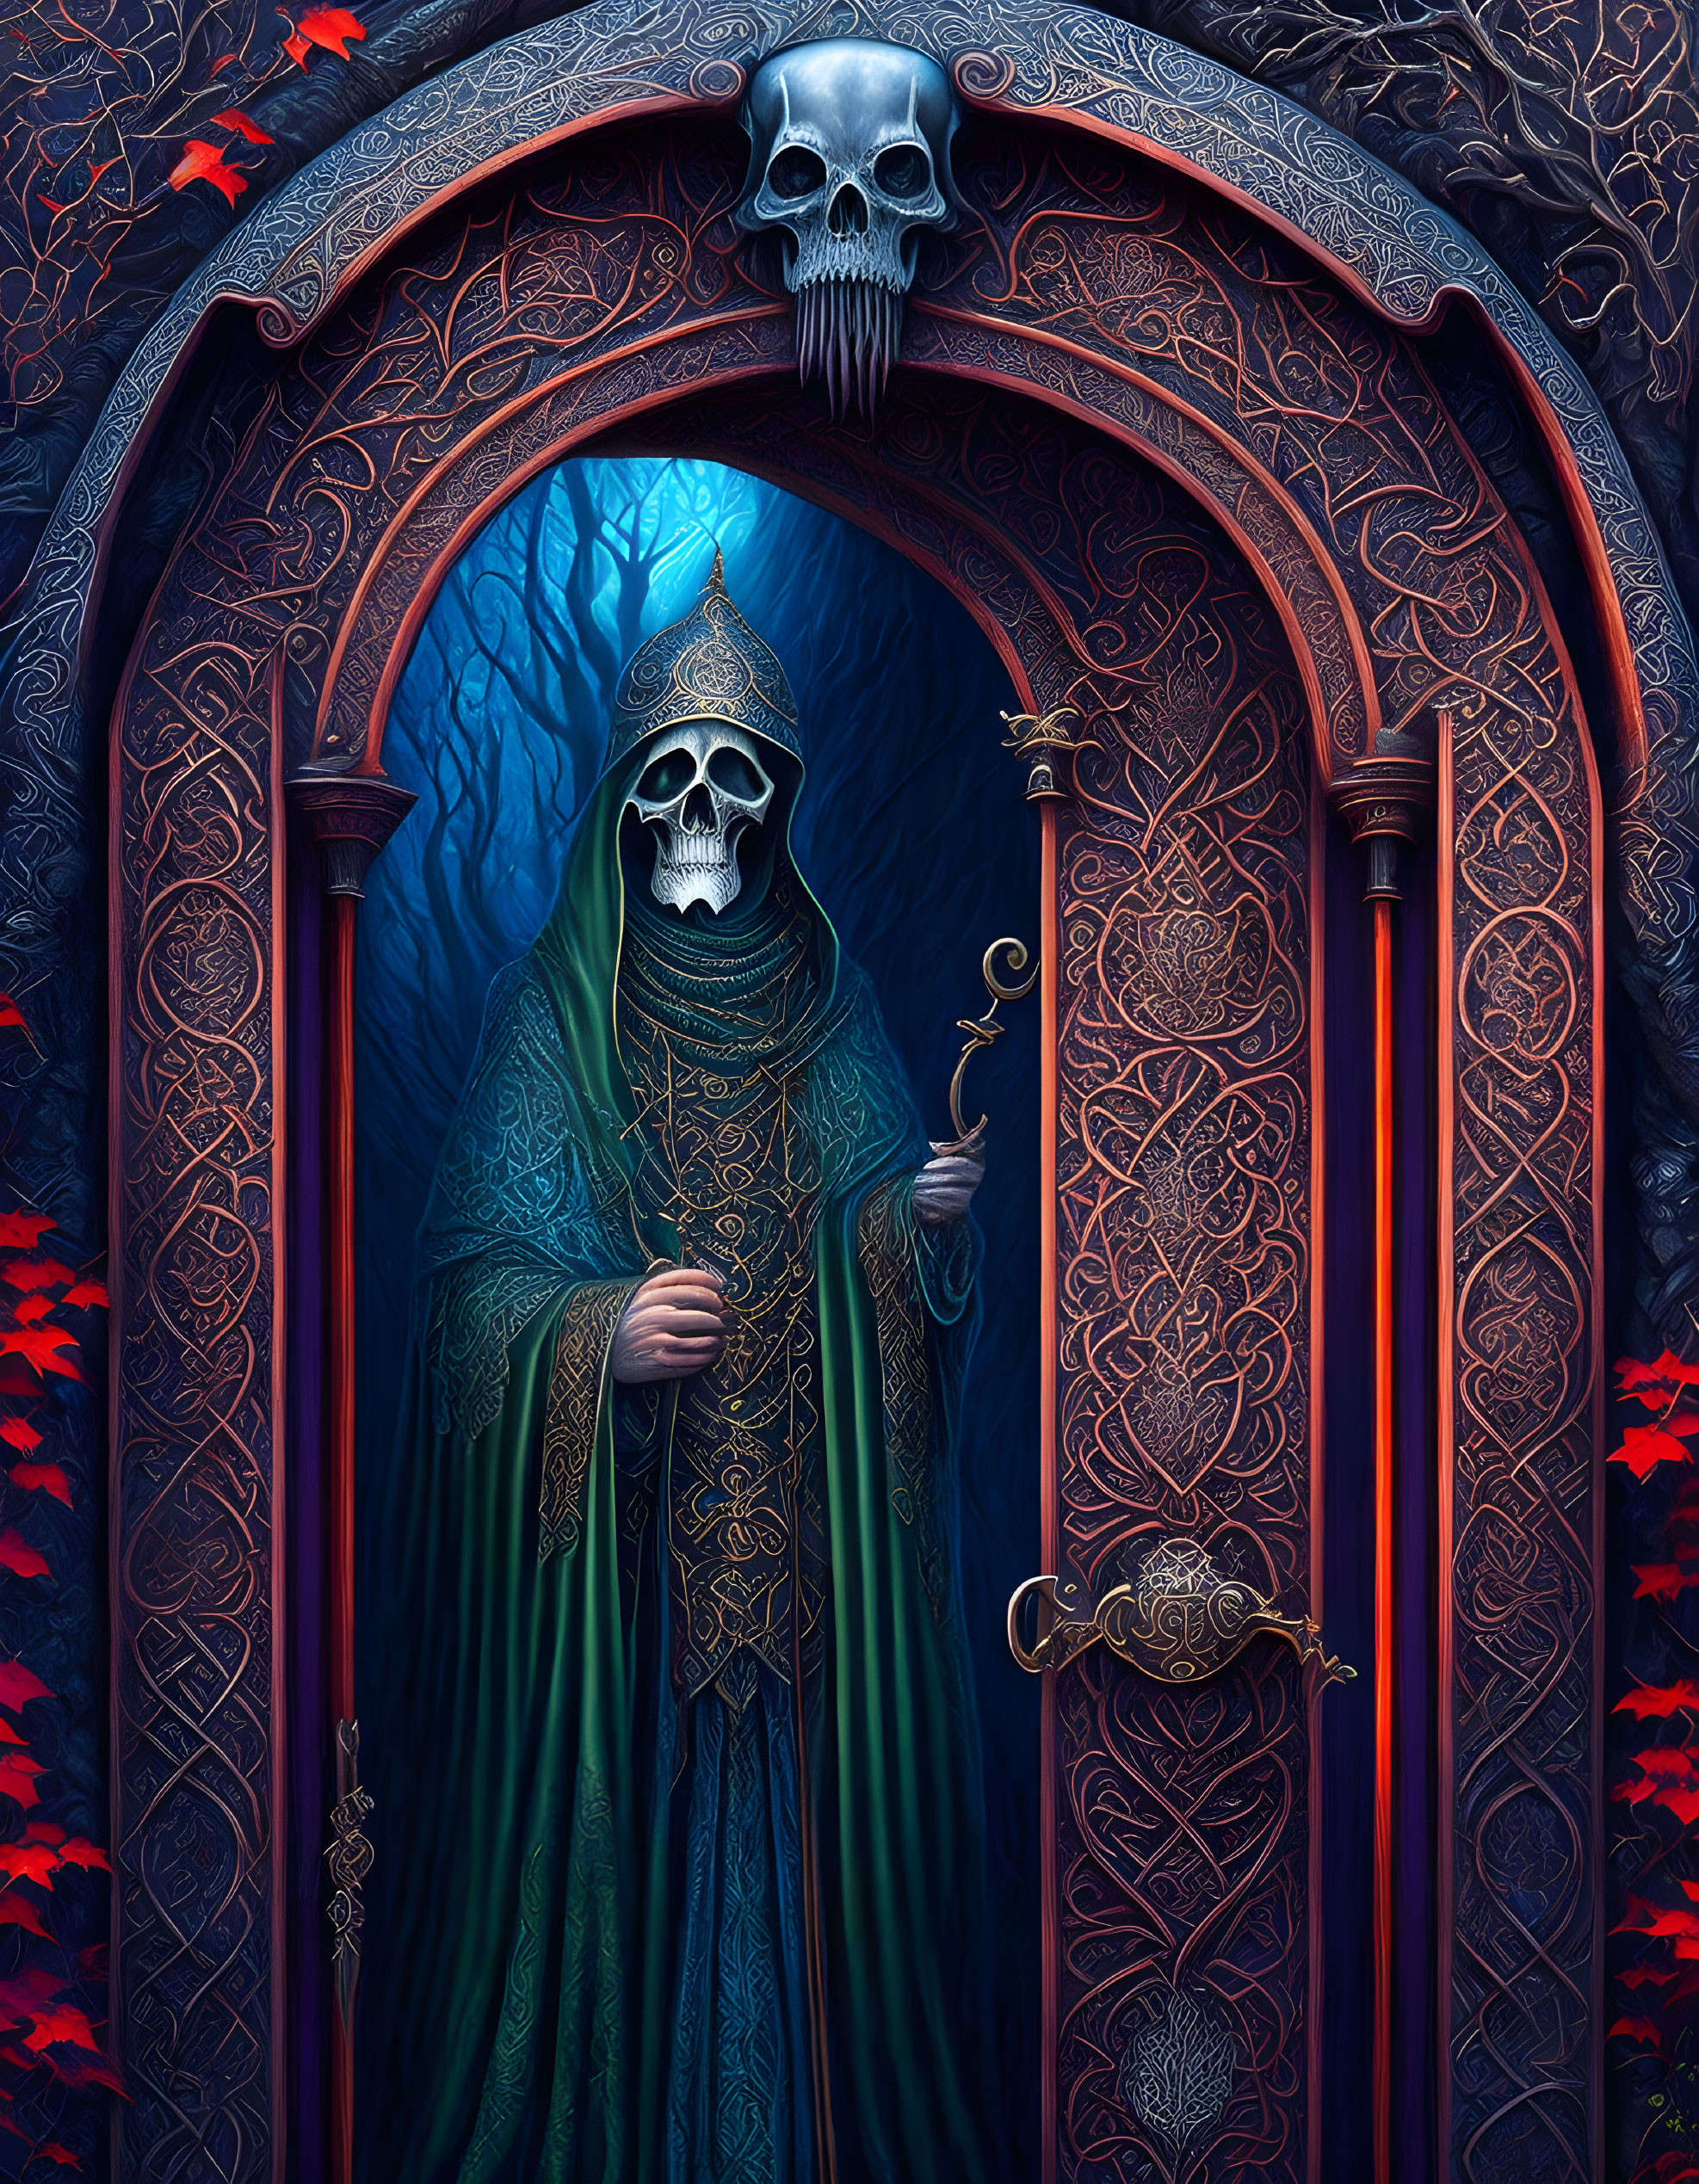 Skeleton figure with key in gothic archway, ivy, skull.